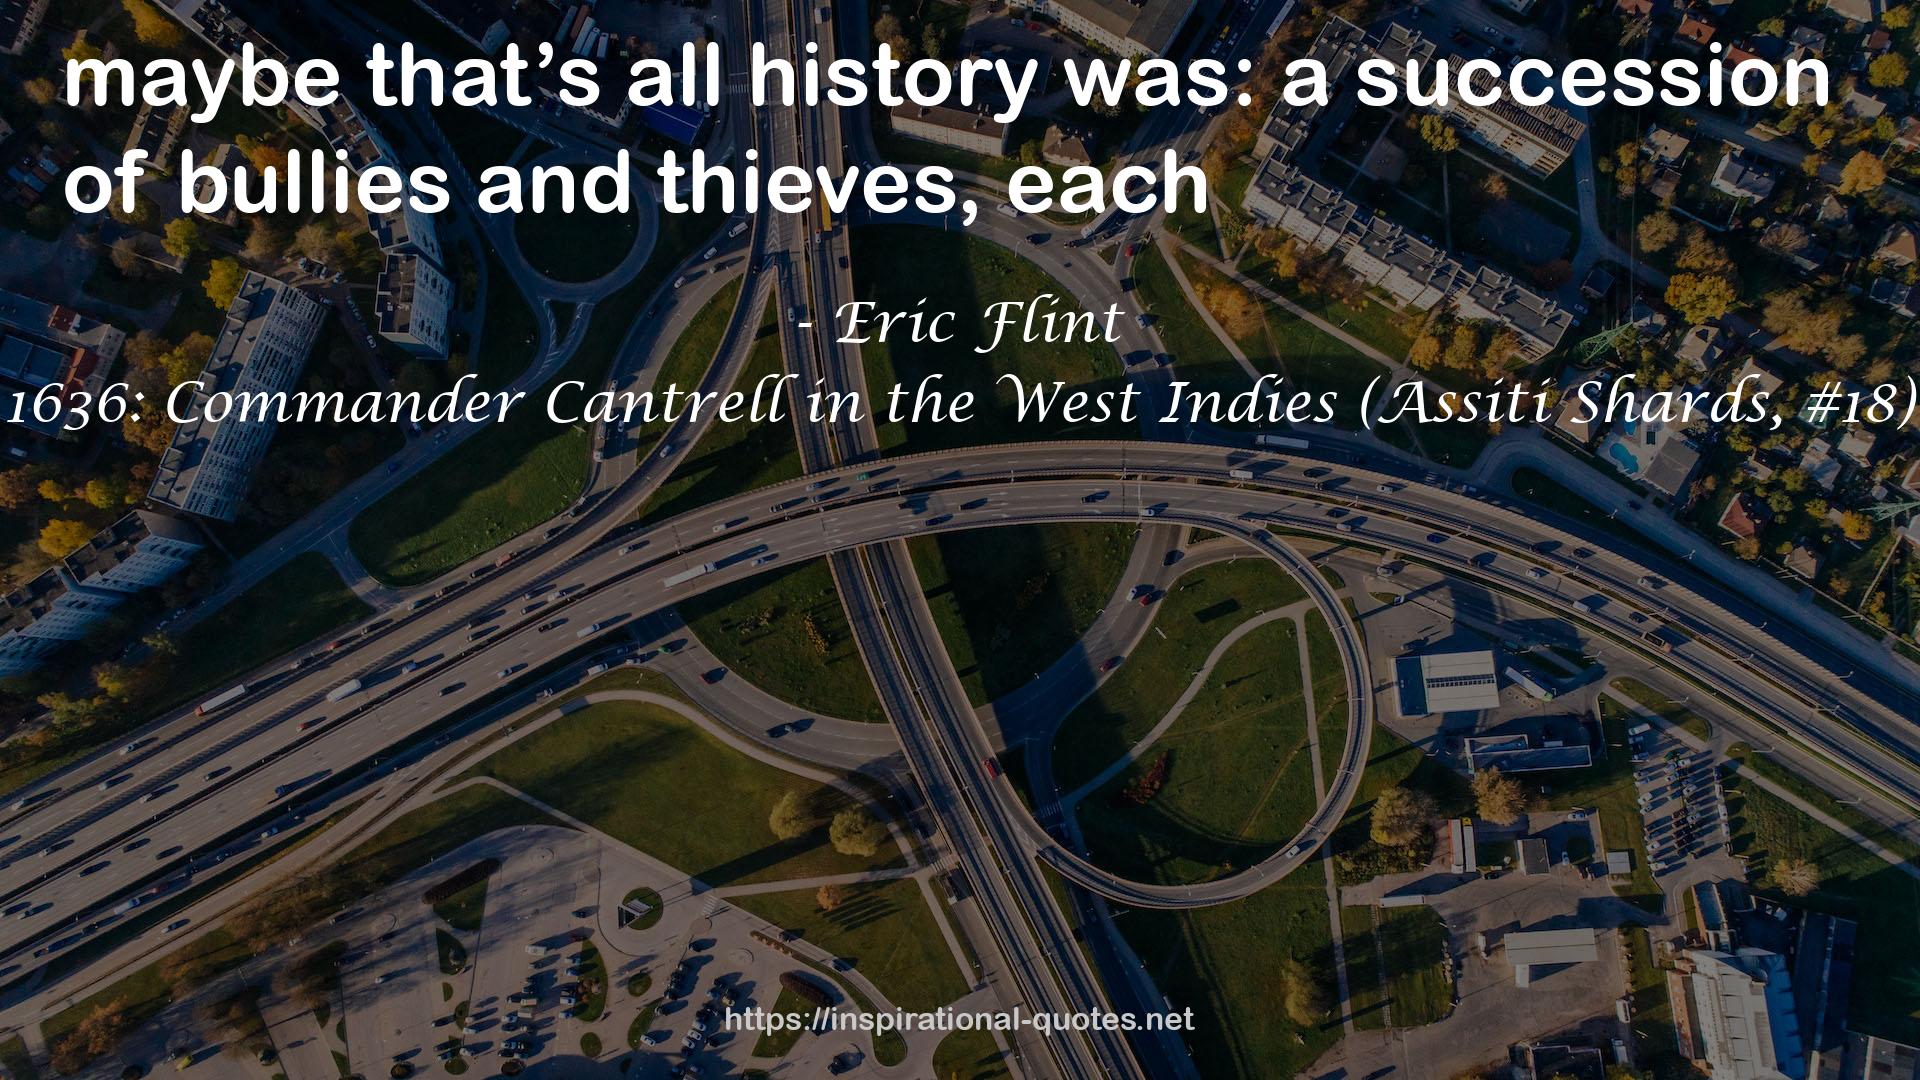 1636: Commander Cantrell in the West Indies (Assiti Shards, #18) QUOTES